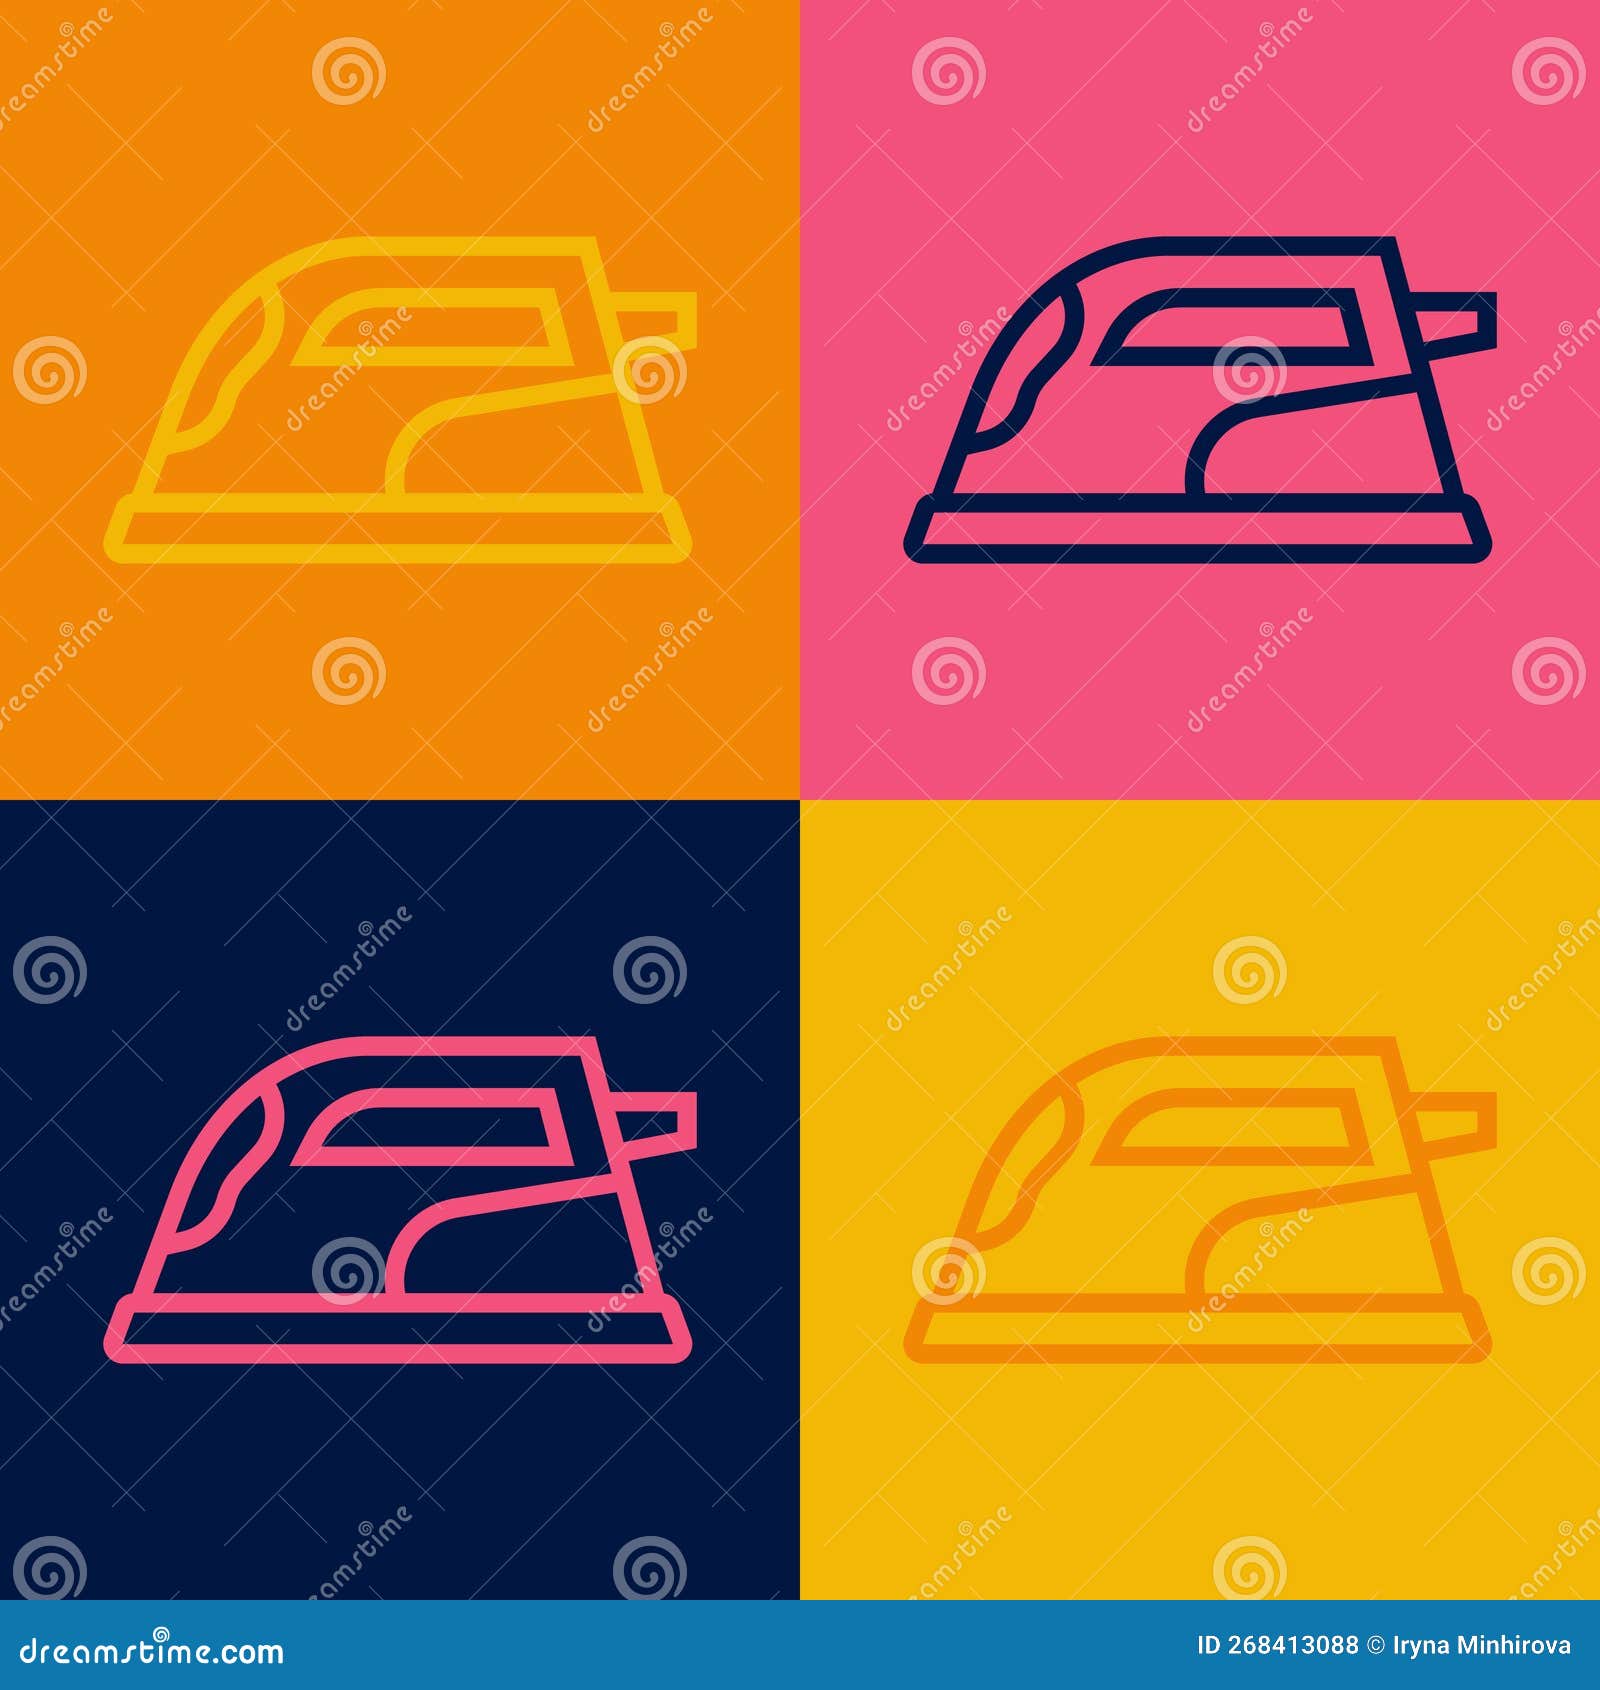 Pop art steam icon isolated on color background Vector Image